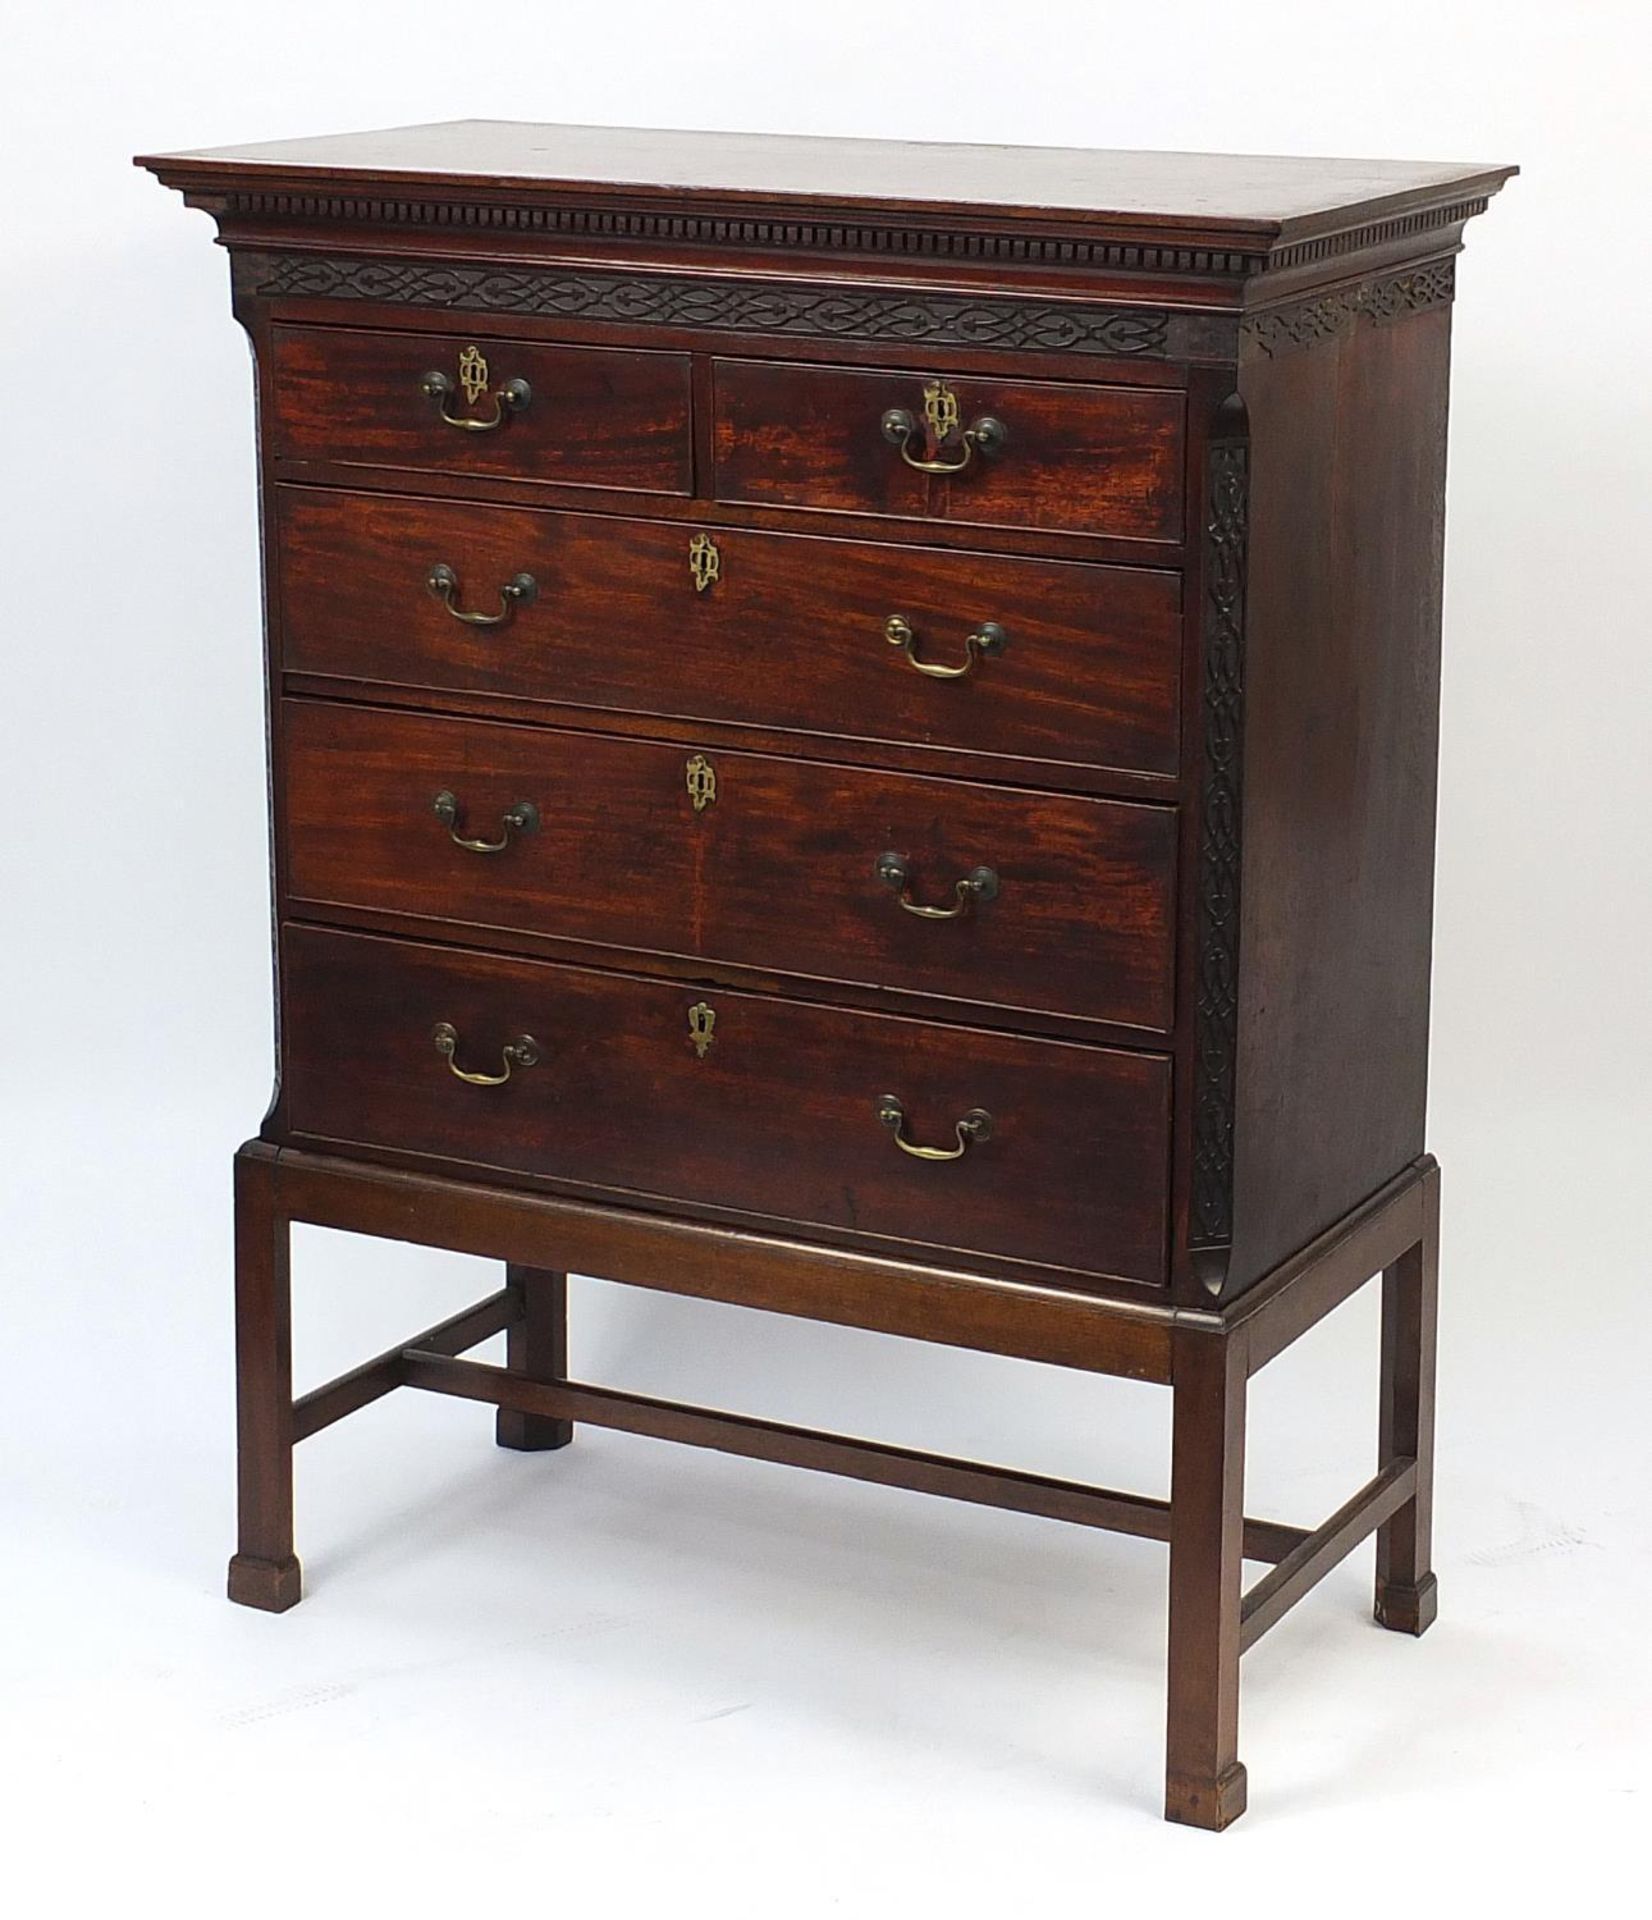 Antique mahogany five drawer chest on stand with blind fretwork, 147cm H x 116cm W x 57.5cm D :